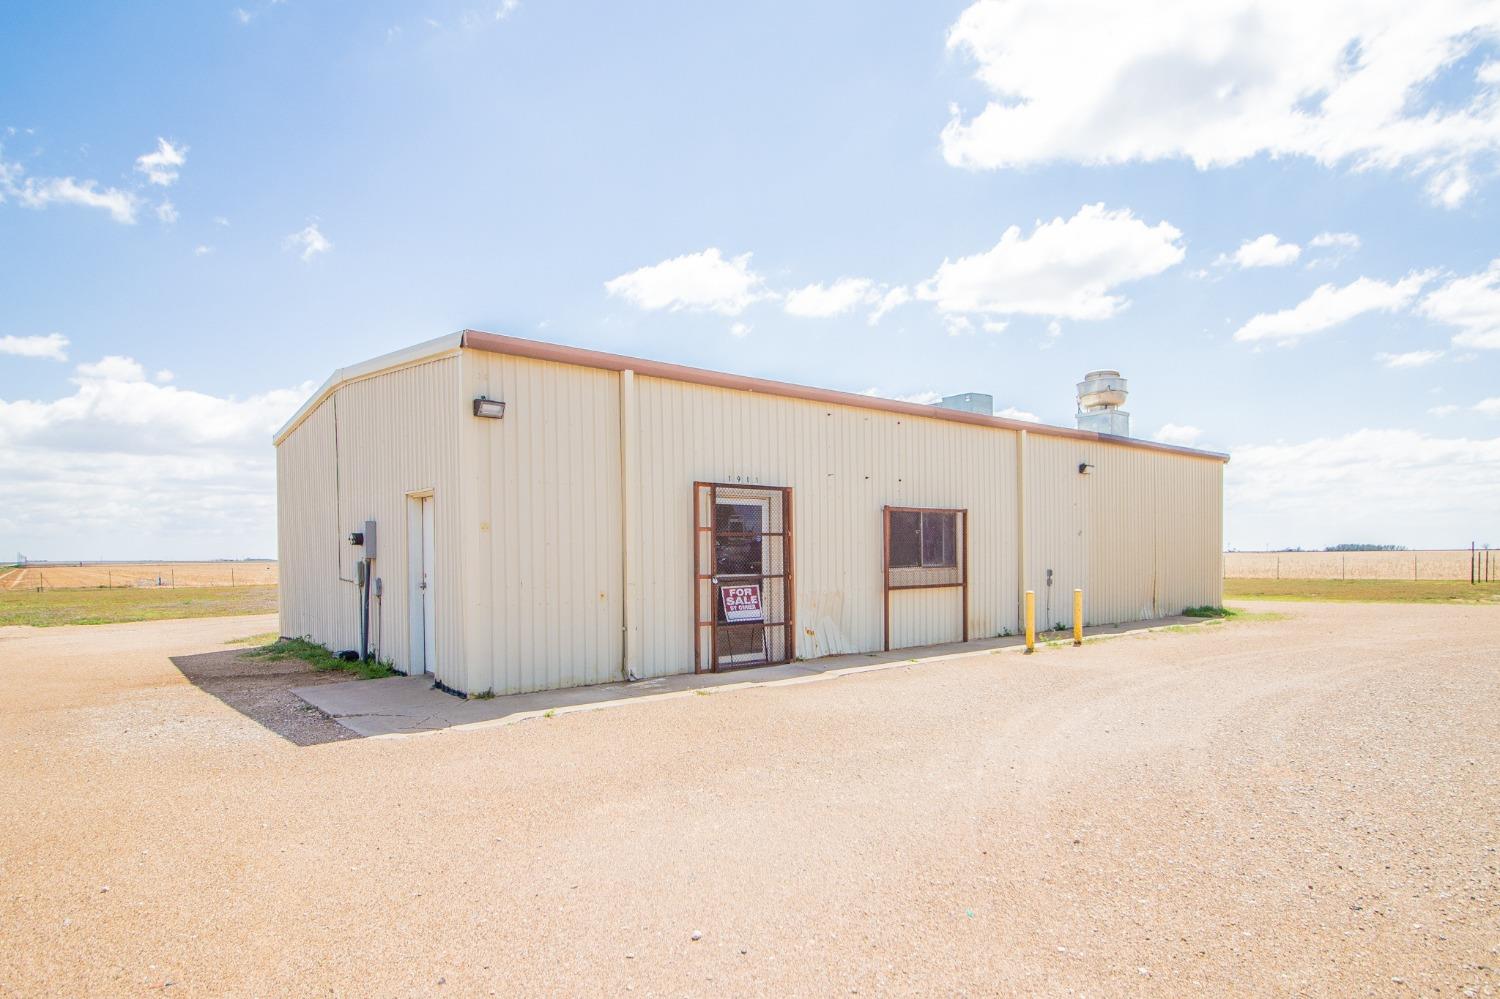 This 1,800 square foot commercial building sits just NE of Buffalo Springs Lake/Ransom Canyon and just east of Roosevelt ISD. This property previously served as a country store/convenience store and is complete with a freezer, built-in refrigerators, a full kitchen, an office, and plenty of space! Scheulde your showing today.